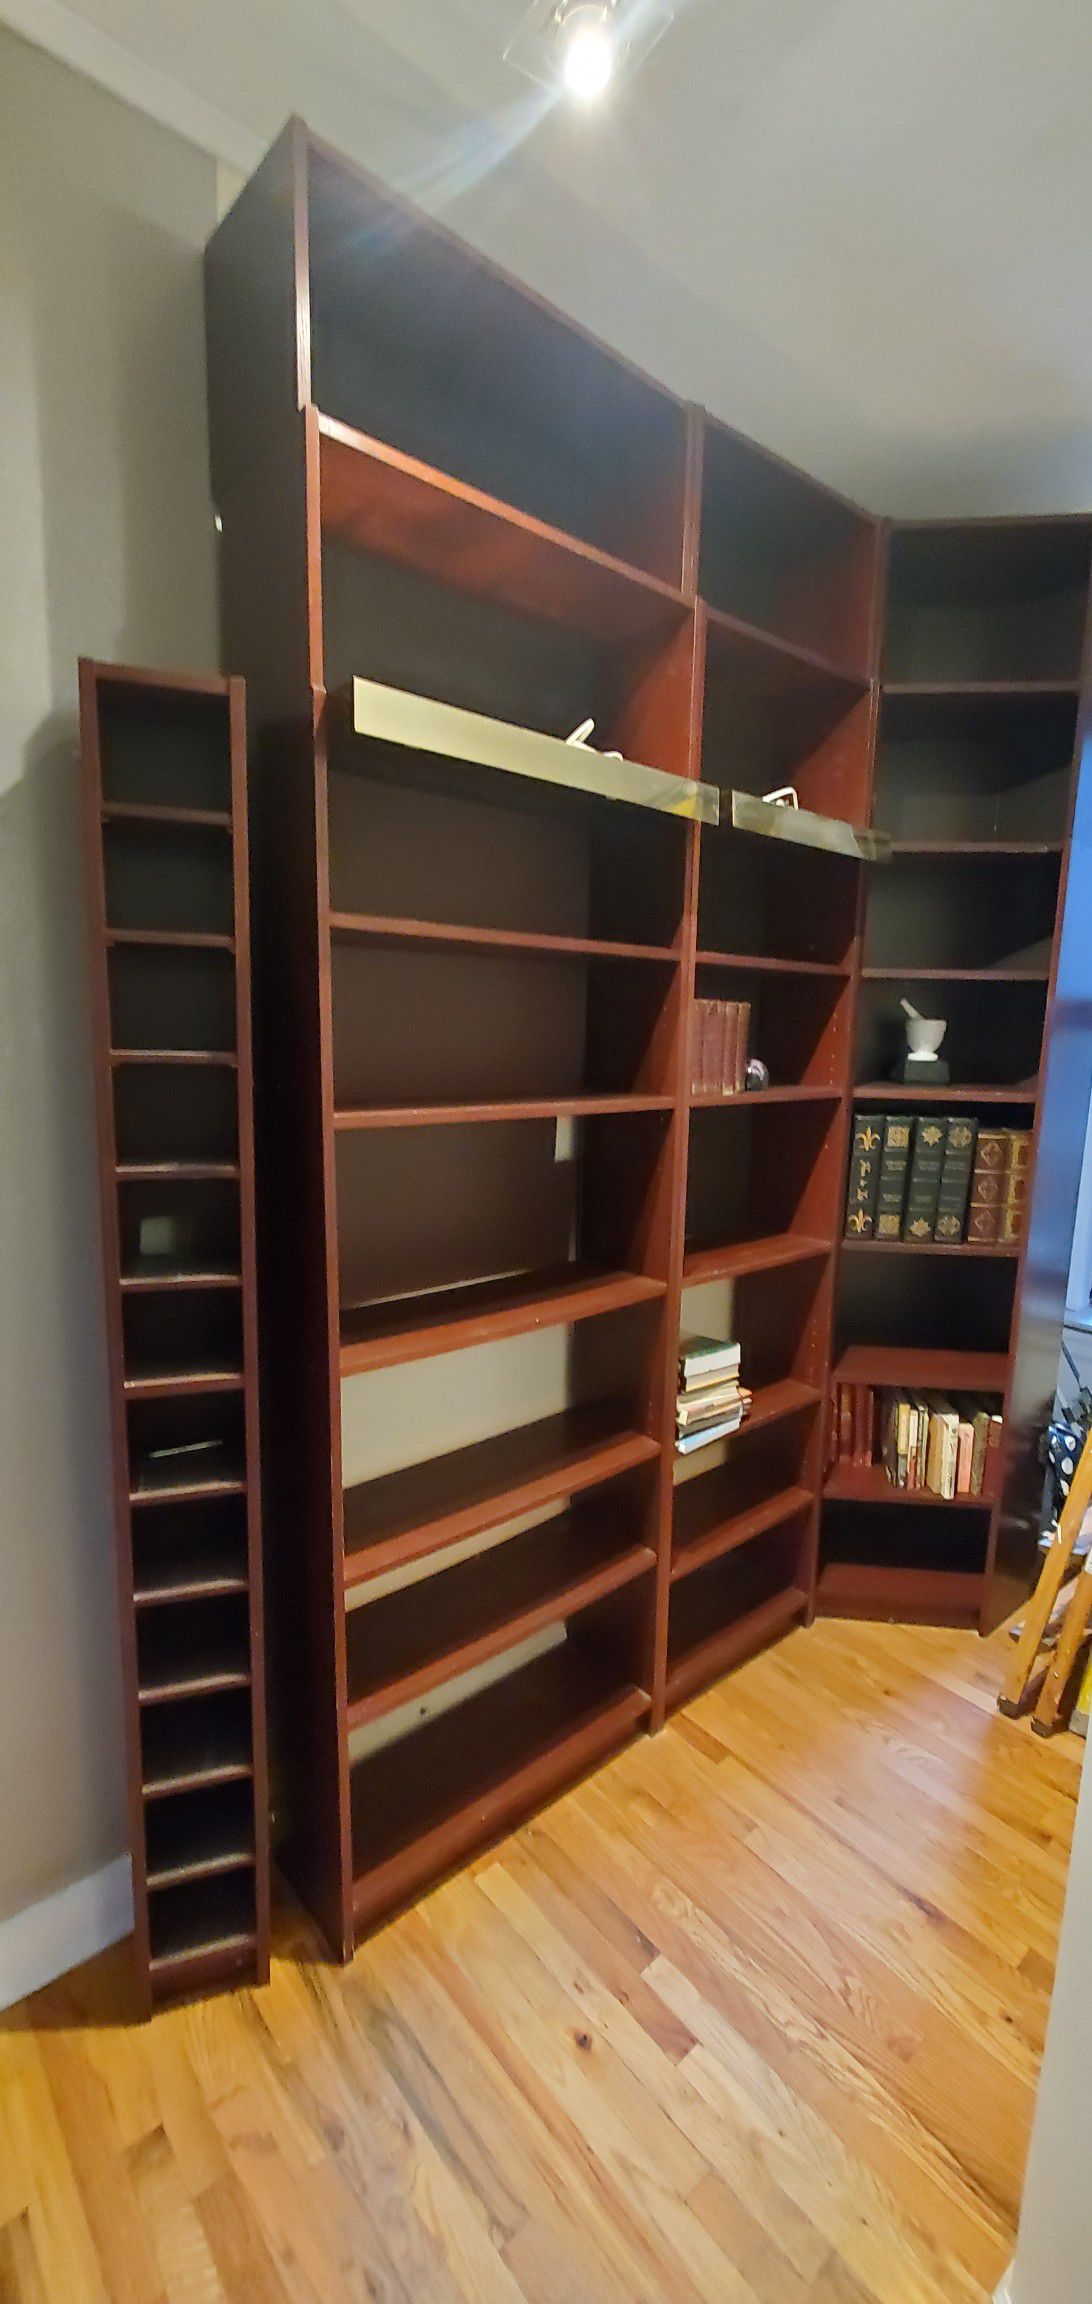 3 Ikea shelves 8 feet tall with 2 feet extensions on top for each shelf